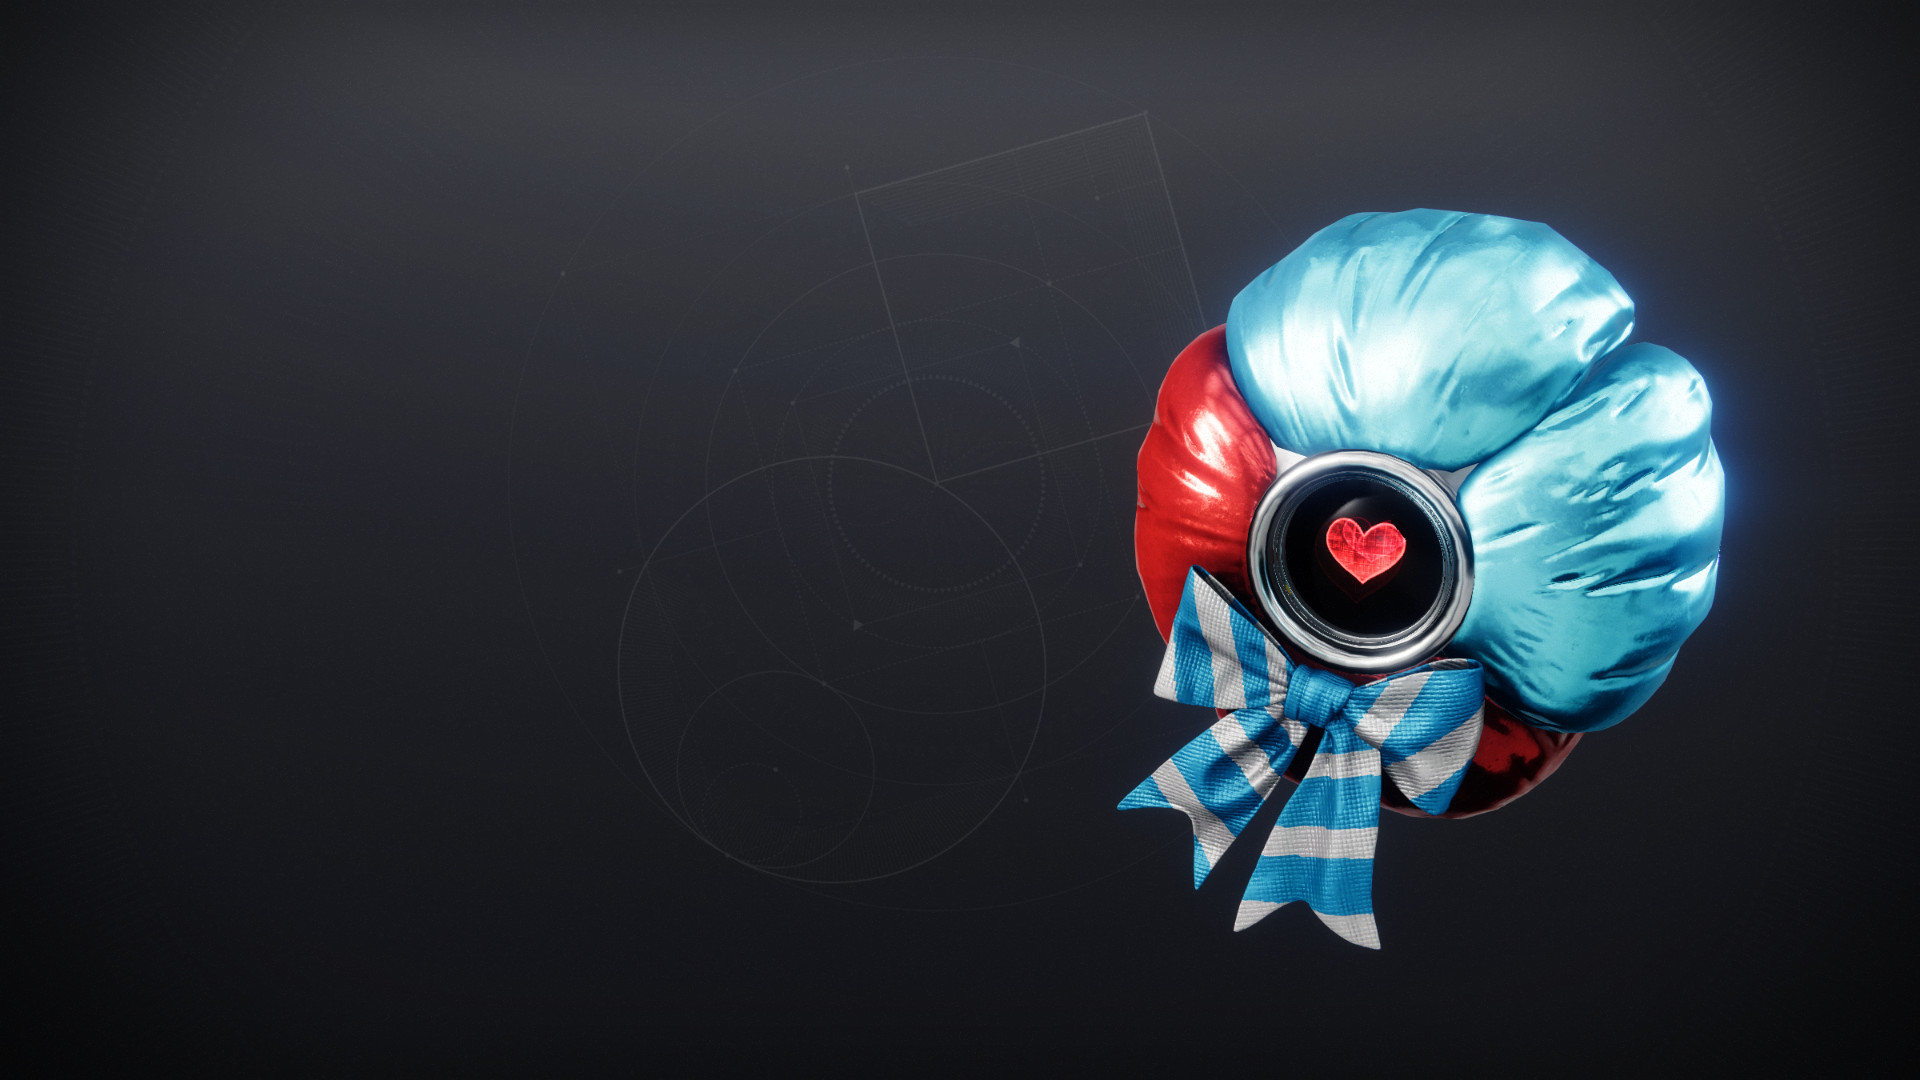 An in-game render of the Tenderhearted Shell.